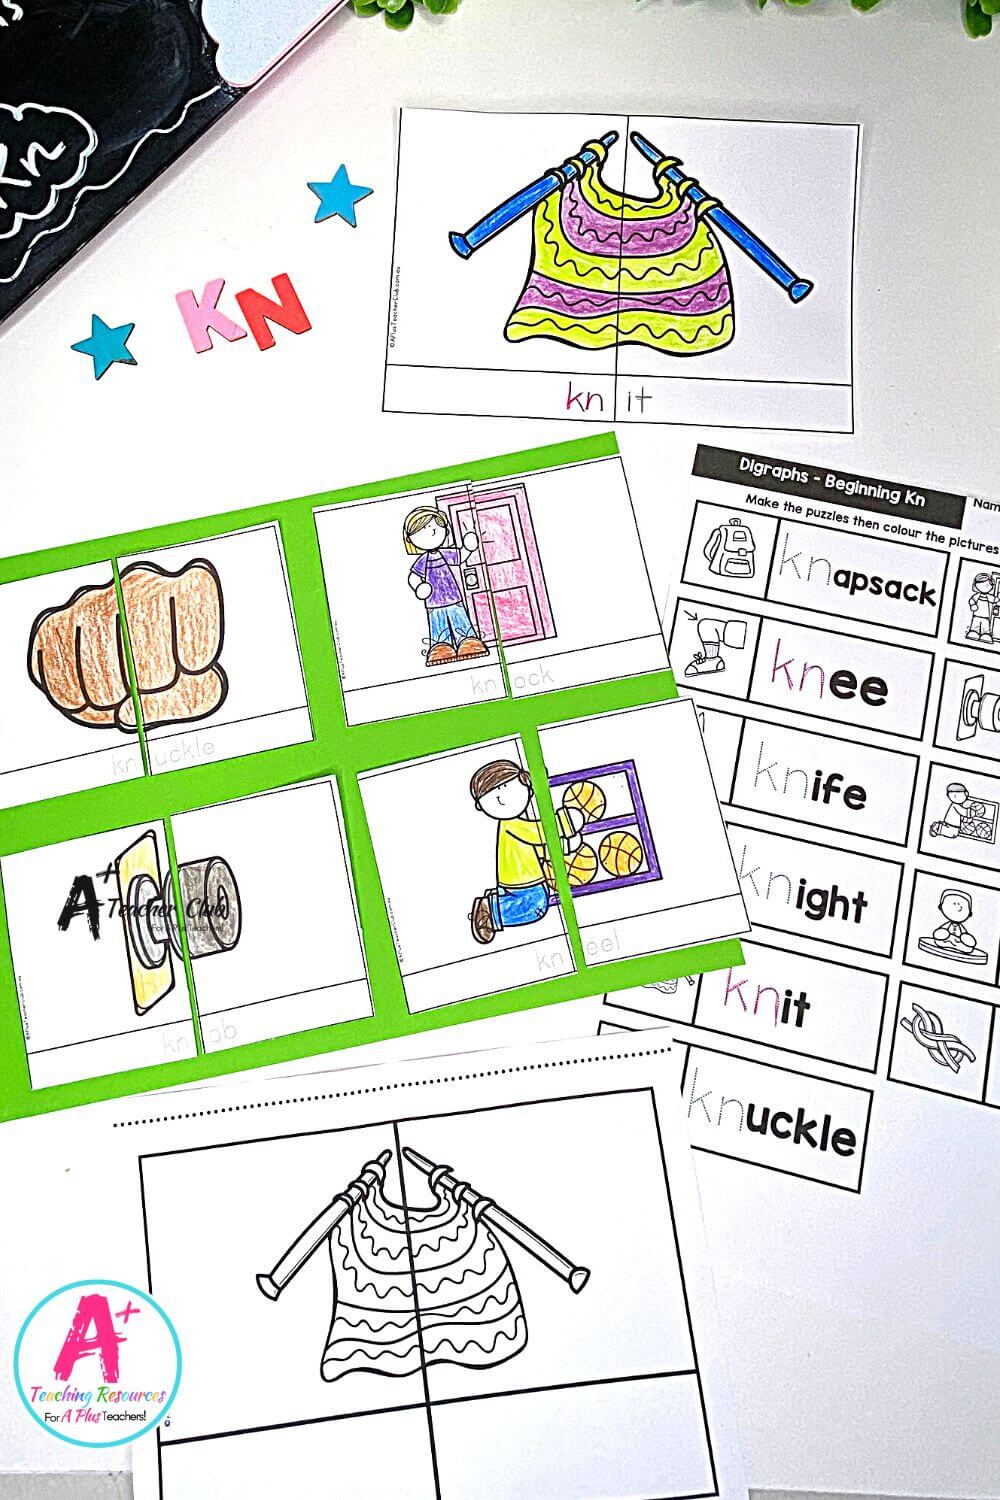 Initial kn Digraph Activities 2 Piece B&W Puzzles